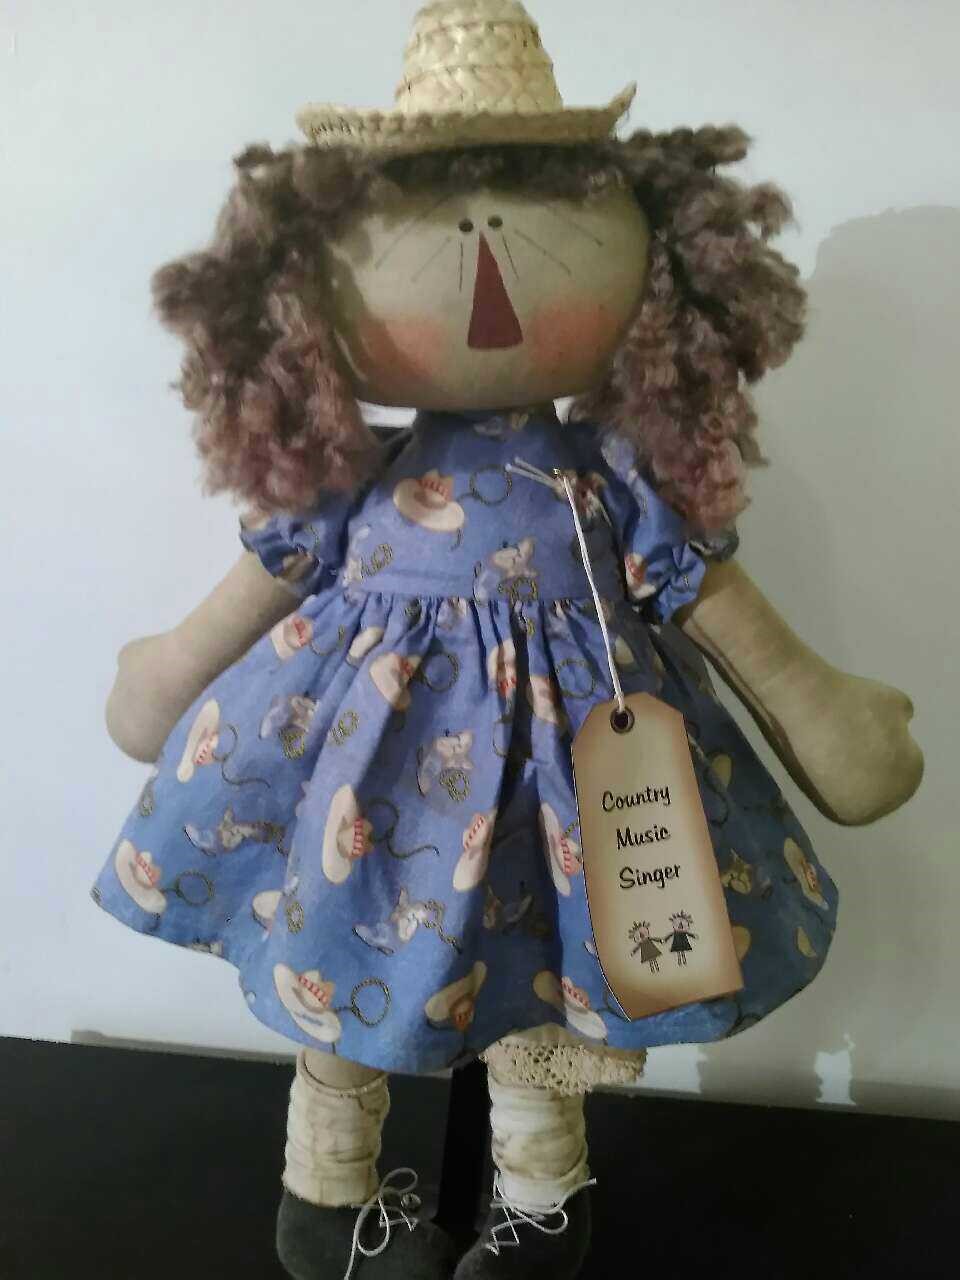 Country Music Singer-handmade, hand crafted, primitive, country, rag doll, rag, doll, wholesale, retail, gift, present, friend gift, birthday gift, original, design, original design, country music, singer